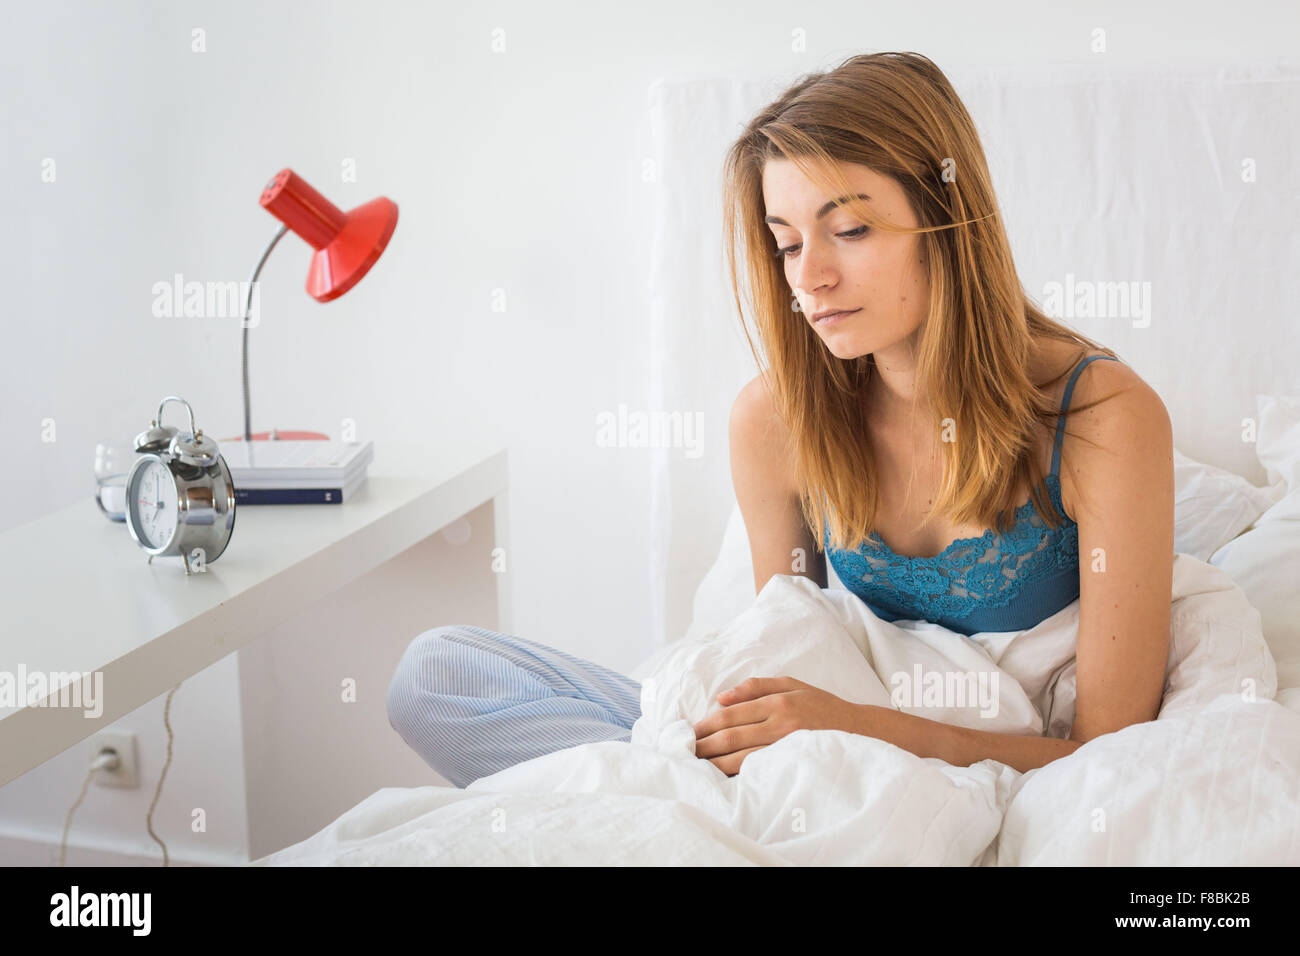 Woman in bed. Stock Photo